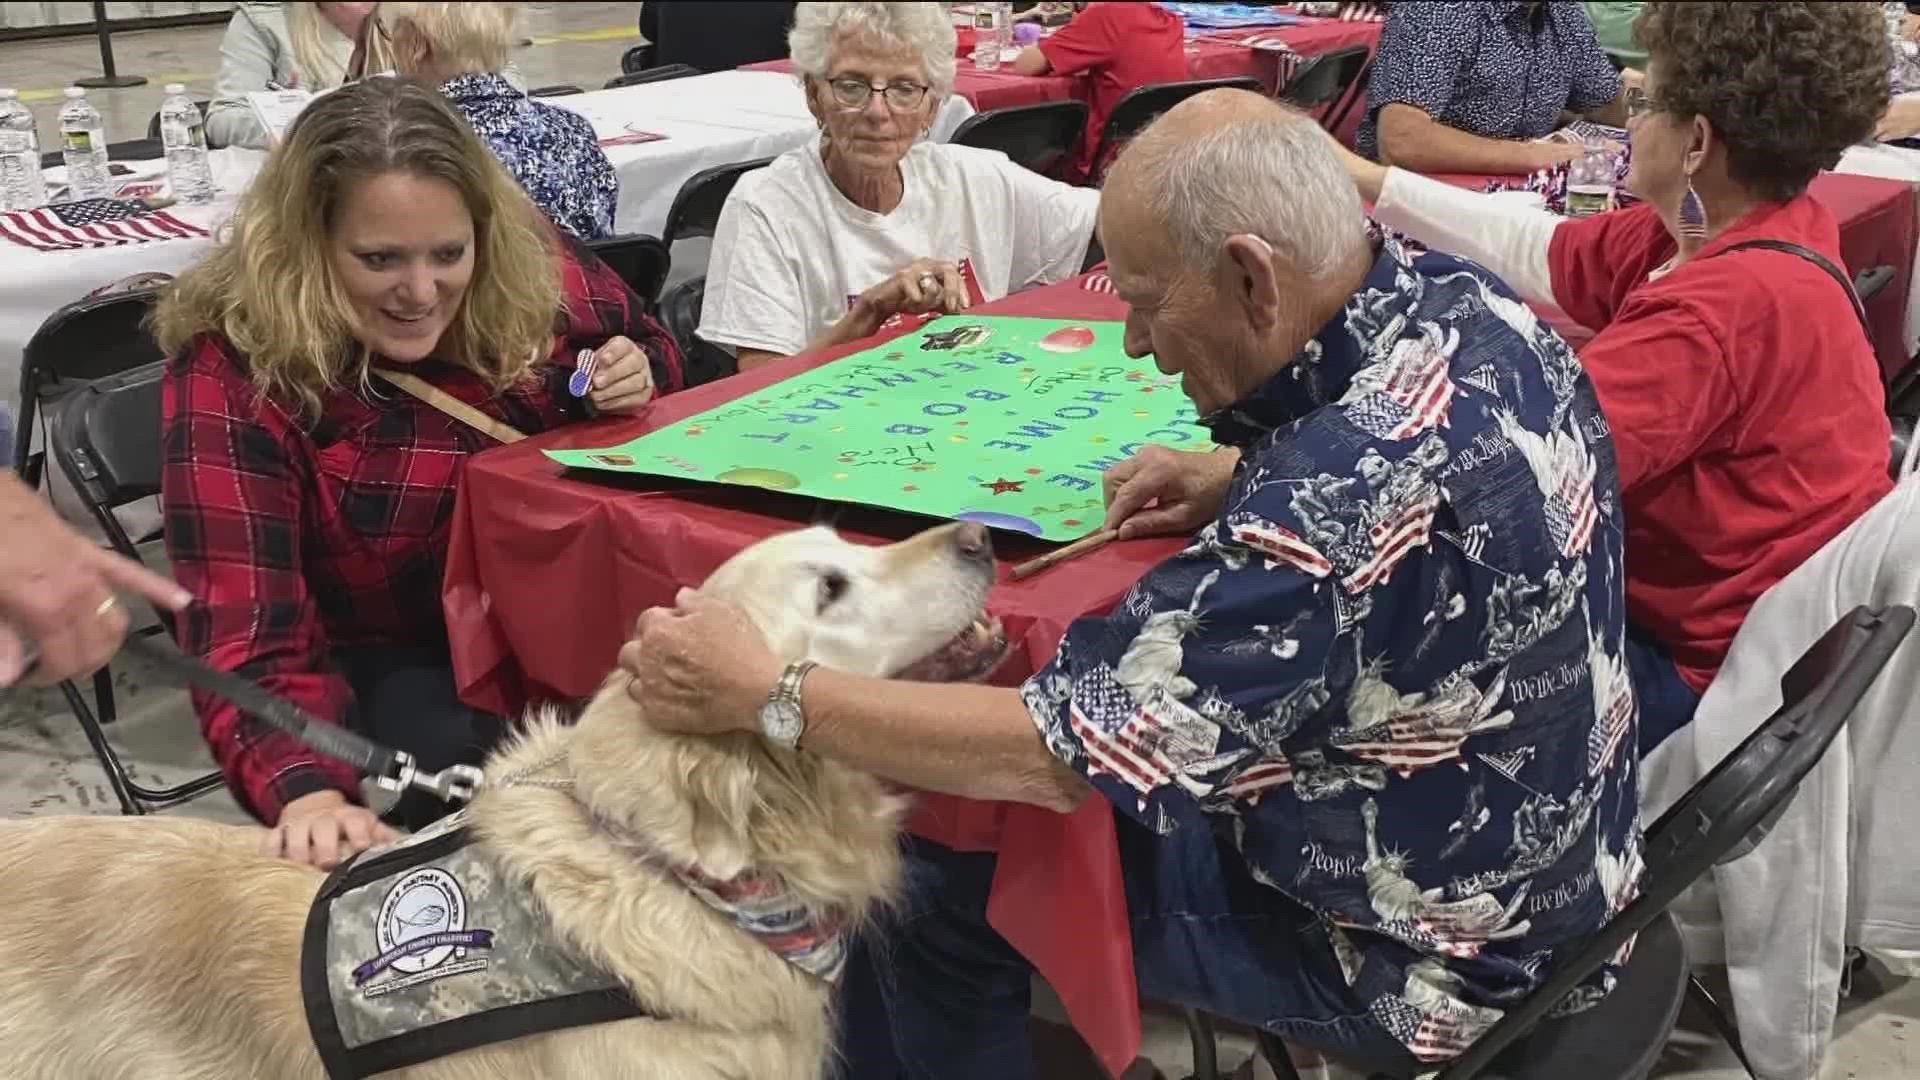 Madelyne Watkins introduce us to Toledo's comfort dogs who bring hope to people in the area and also thousands of miles away.